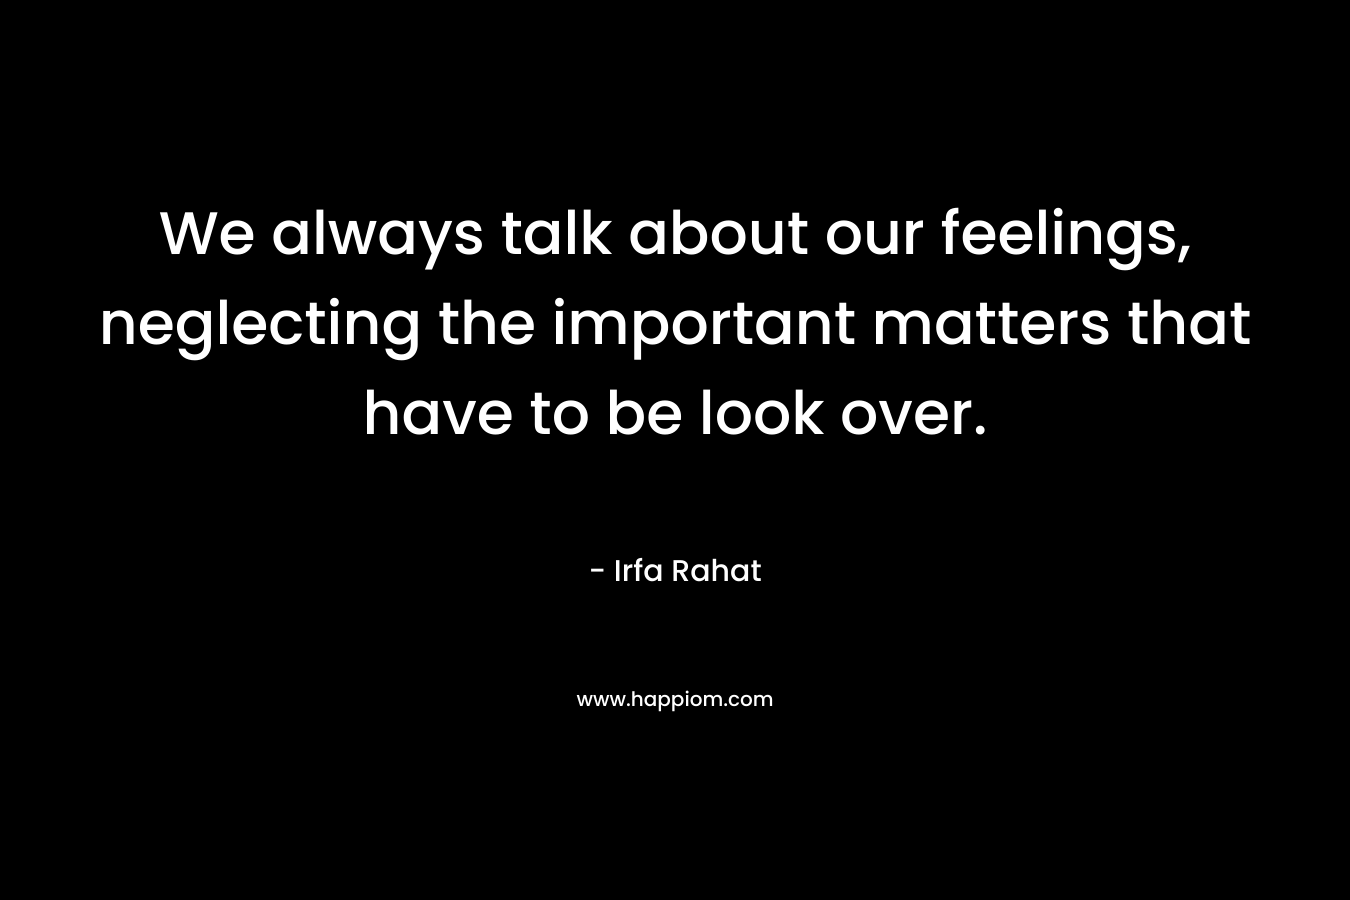 We always talk about our feelings, neglecting the important matters that have to be look over.